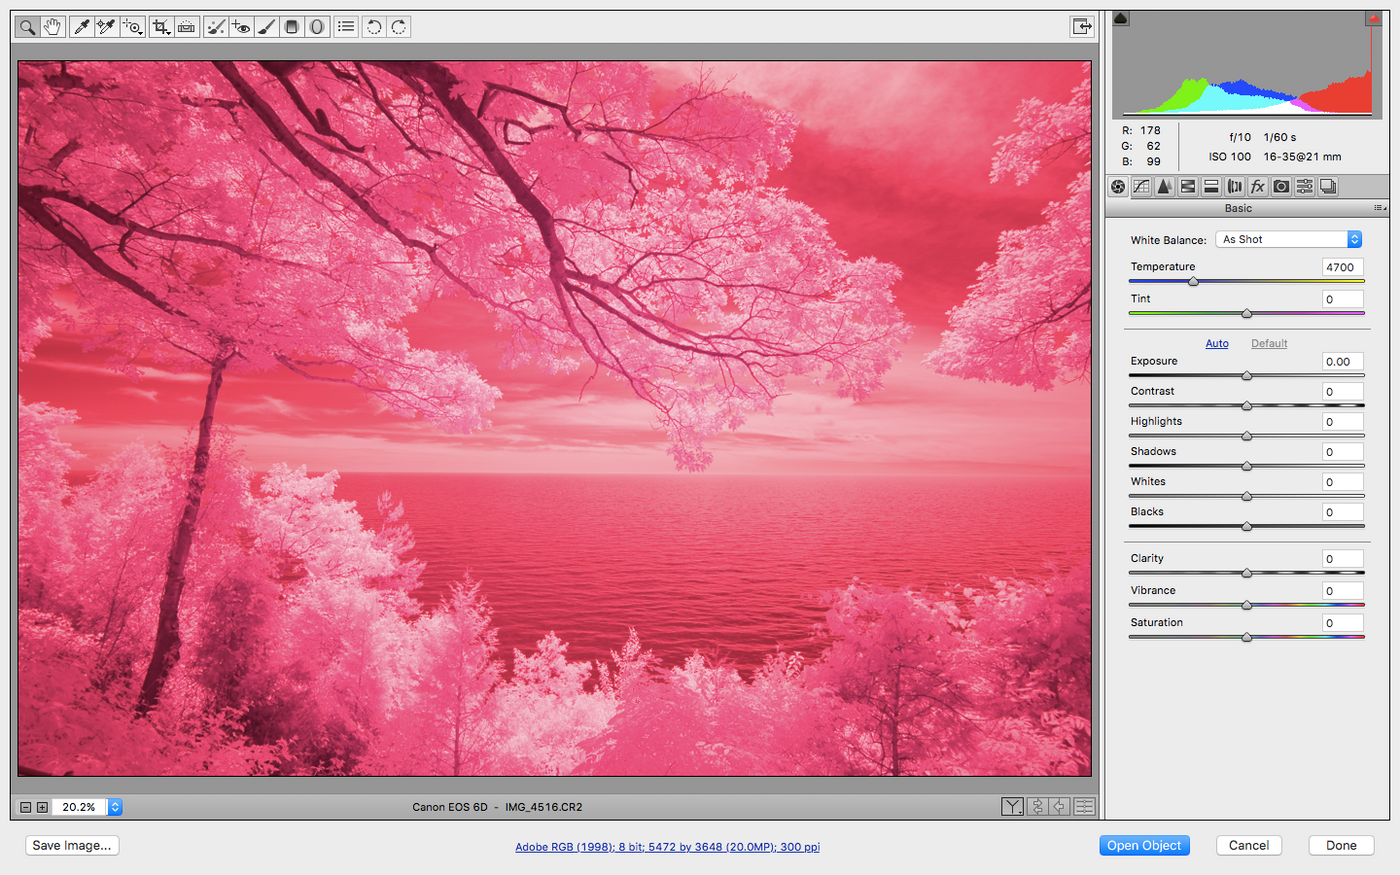 How To Process Infrared Images in Photoshop